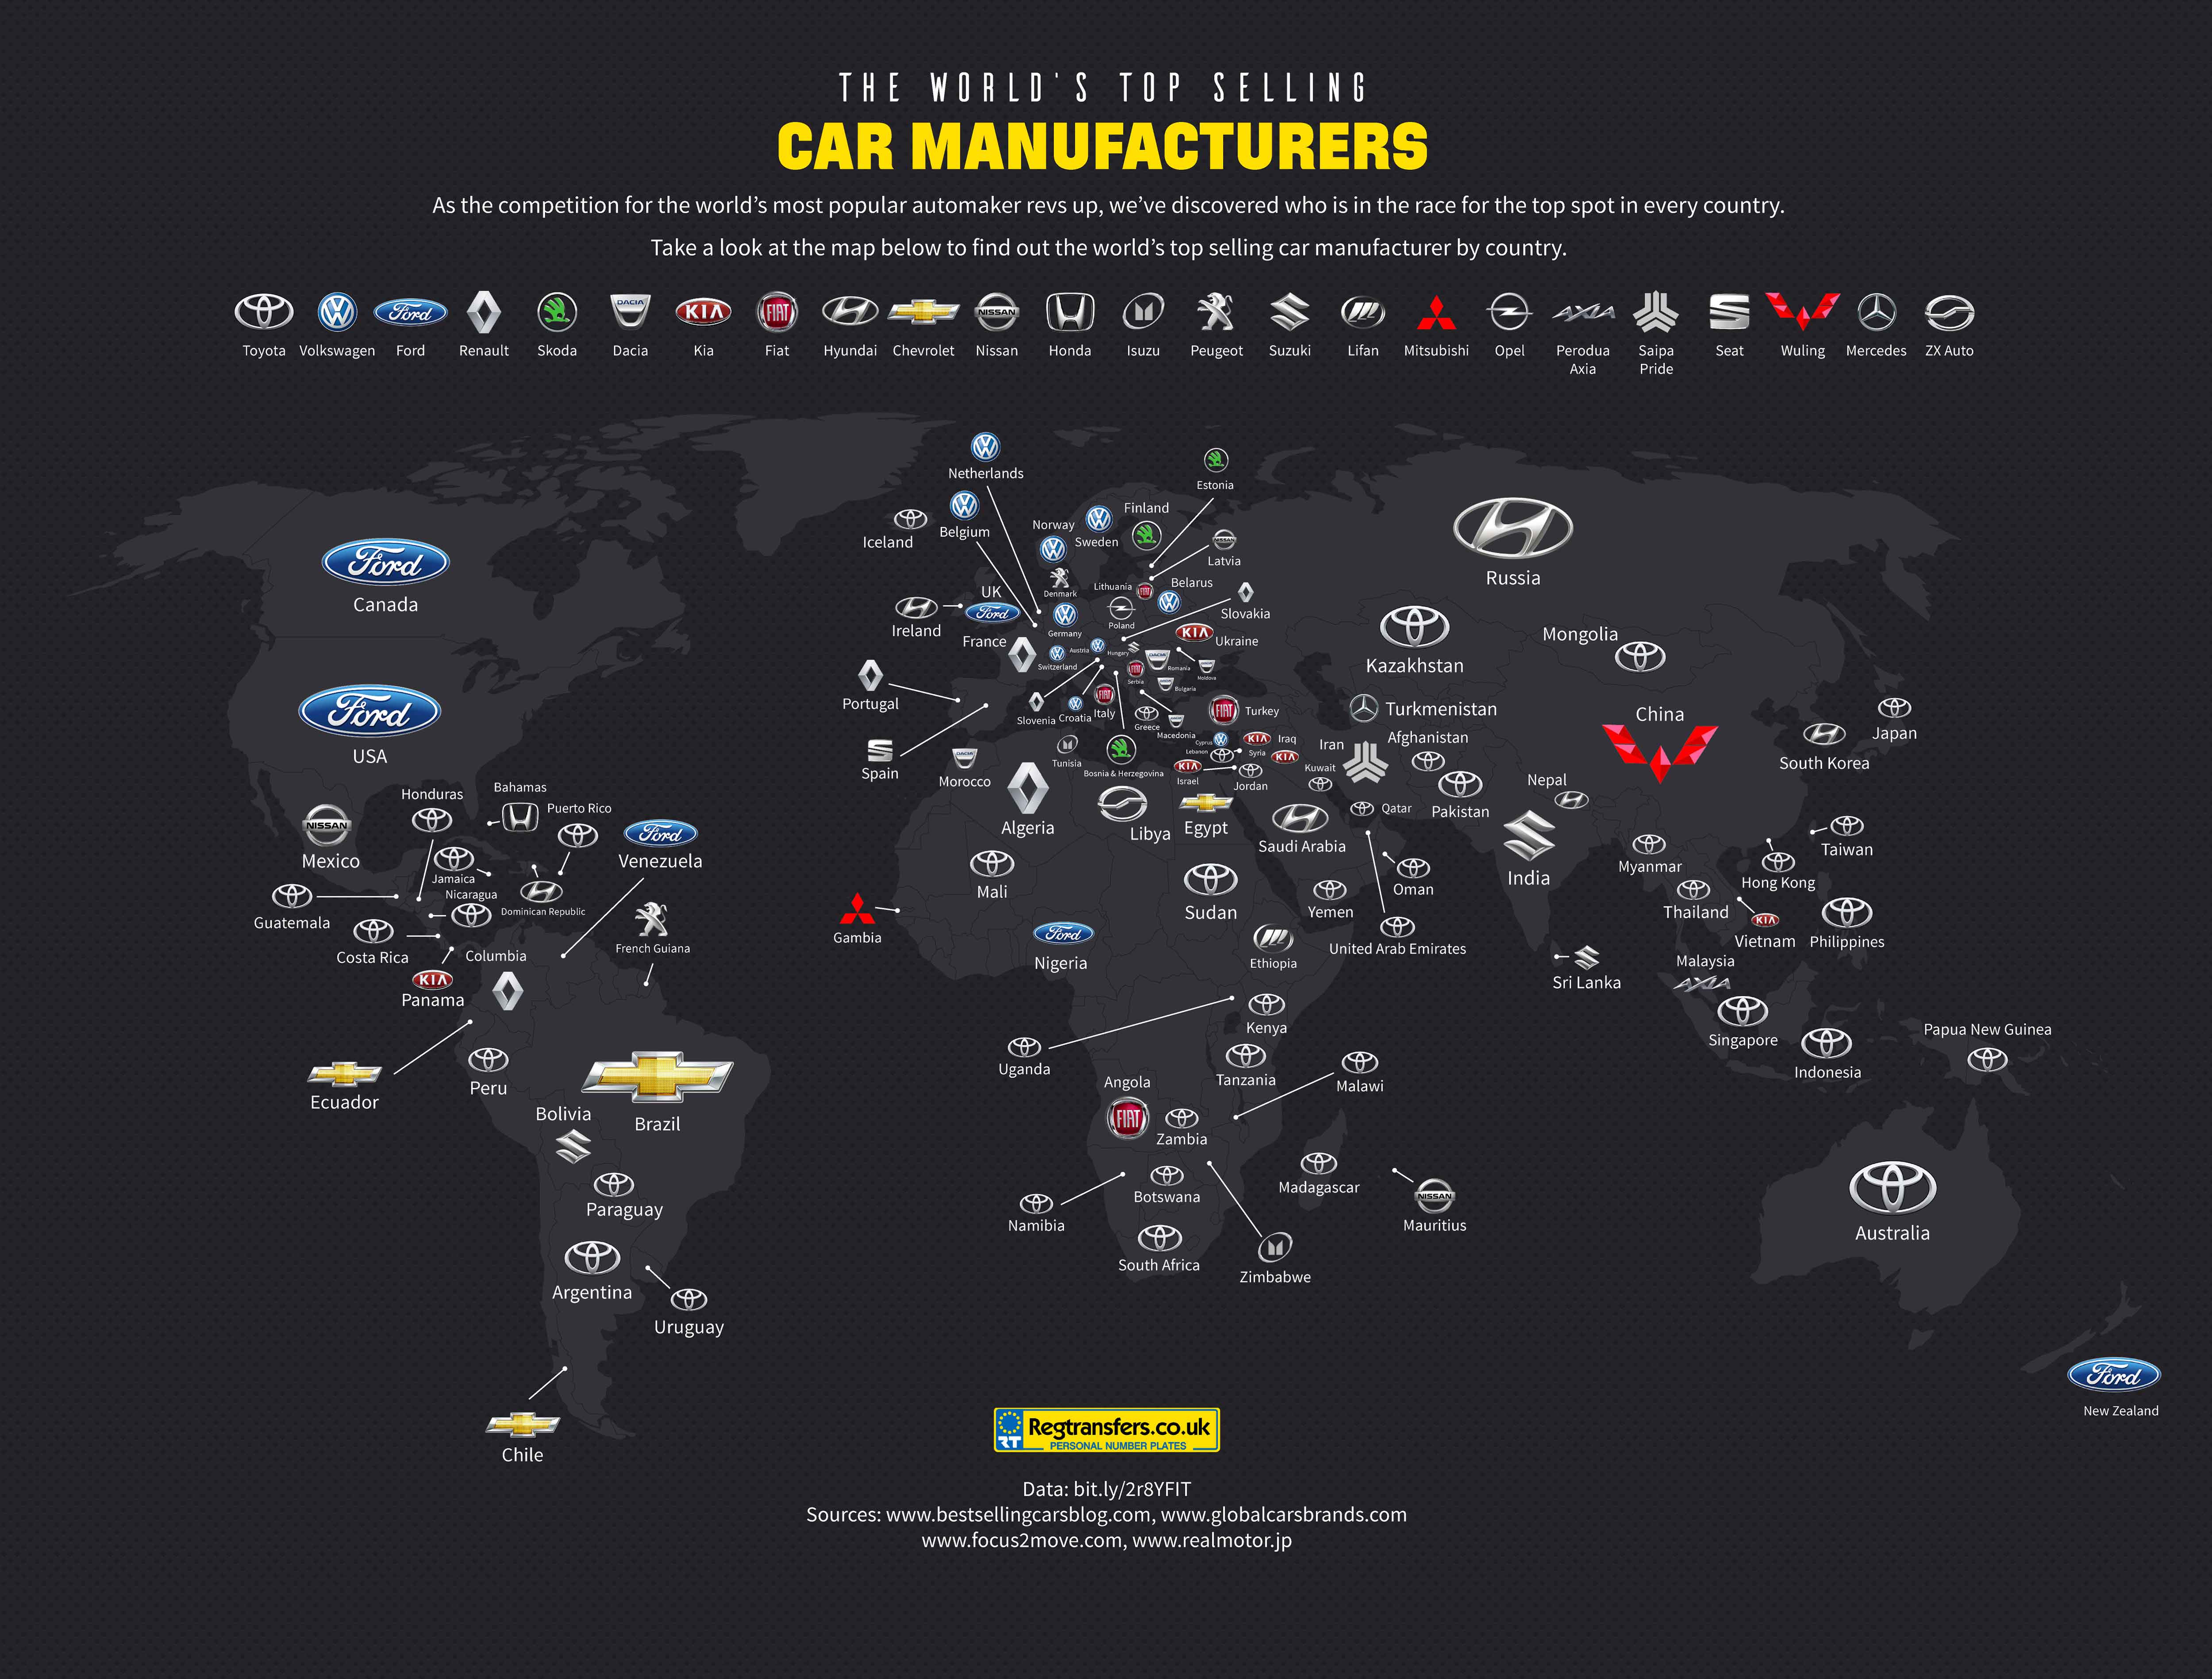 A study of The World's top selling car manufacturers by country